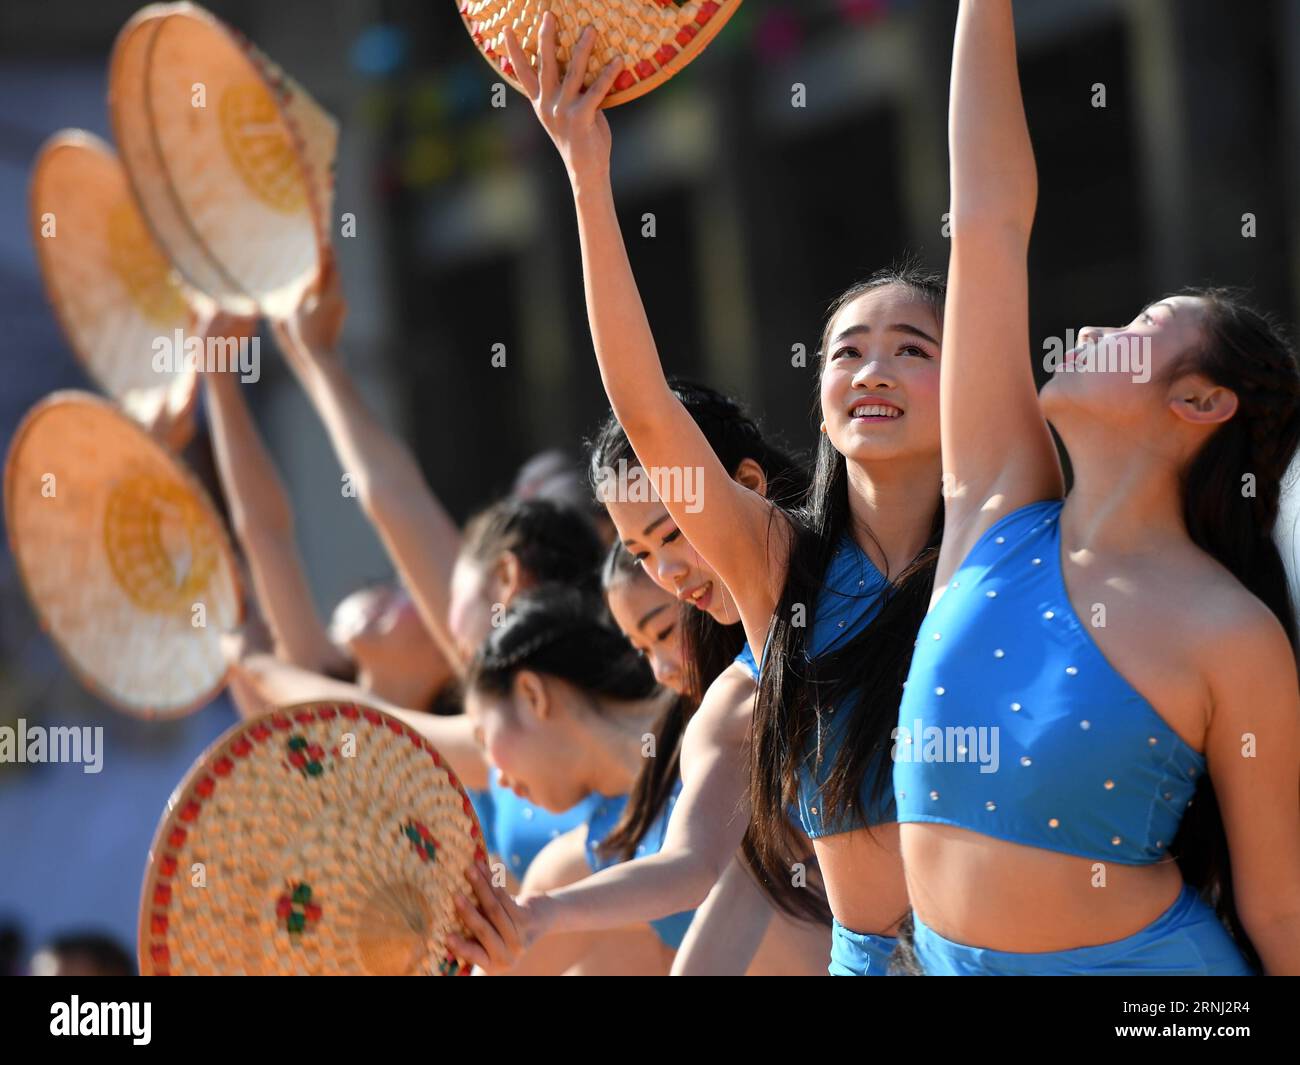 (161228) -- RONGAN, Dec. 28, 2016 -- Women perform in Chang an Township in Rong an County, south China s Guangxi Zhuang Automonous Region, Dec. 28, 2016. A celebration was held for the harvest of kumquat fruit here on Wednesday. ) (zyd) CHINA-GUANGXI-KUMQUAT HARVEST-CELEBRATION (CN) LuxBo an PUBLICATIONxNOTxINxCHN   Rongan DEC 28 2016 Women perform in Chang to Township in Rong to County South China S Guangxi Zhuang  Region DEC 28 2016 a Celebration what Hero for The Harvest of Kumquat Fruit Here ON Wednesday ZYD China Guangxi Kumquat Harvest Celebration CN LuxBo to PUBLICATIONxNOTxINxCHN Stock Photo